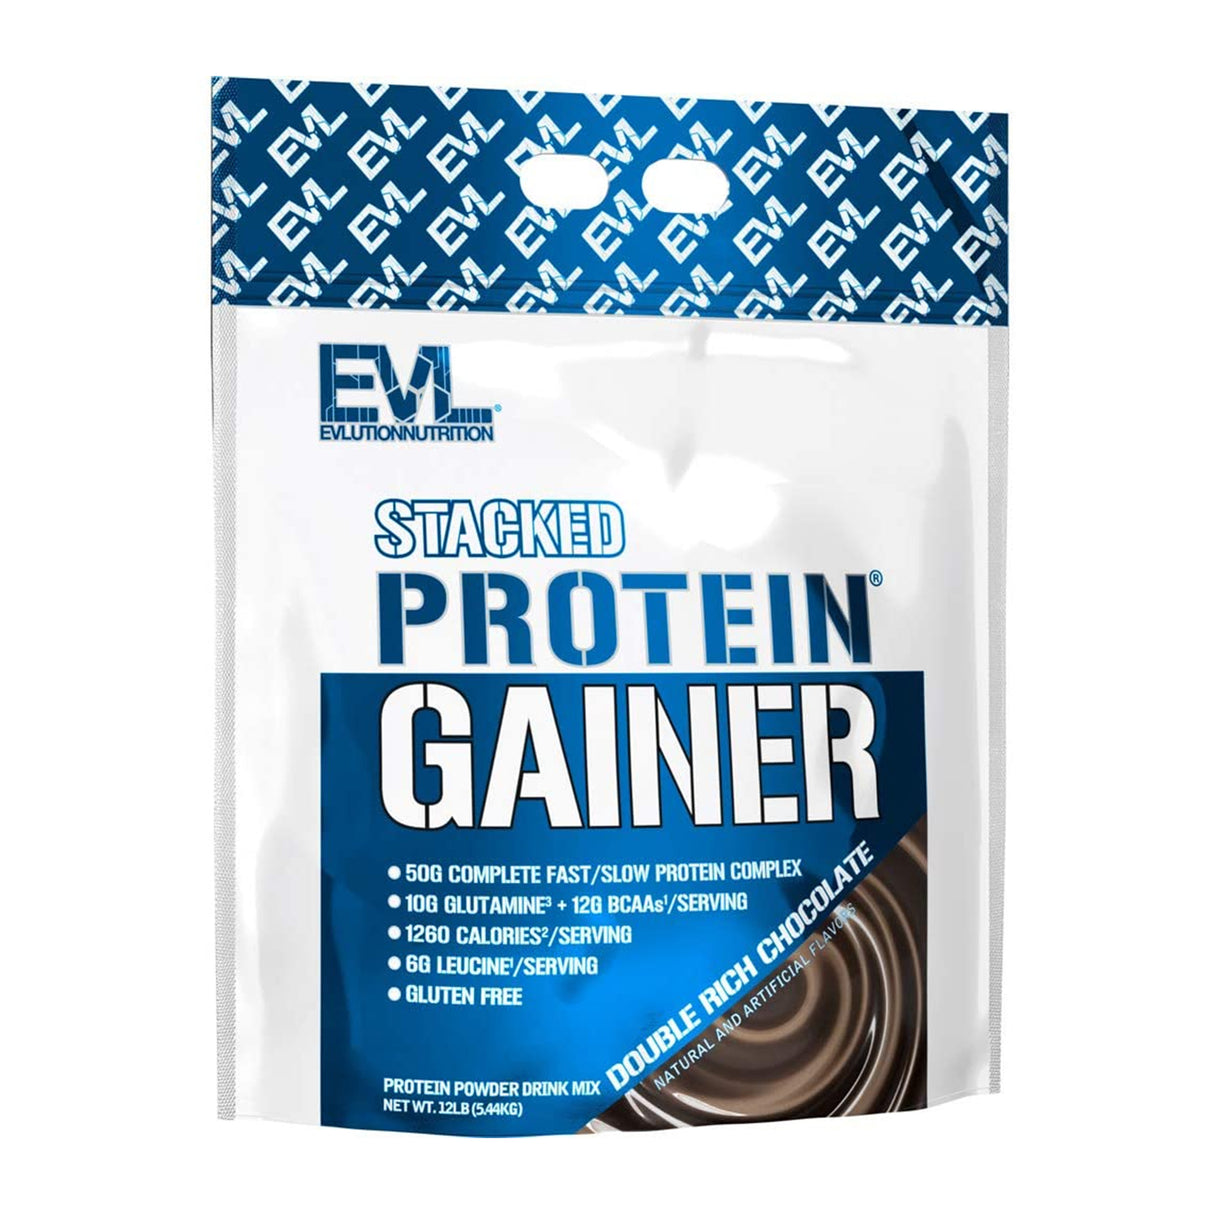 STACKED PROTEIN GAINER | 12 LBS DOUBLE RICH CHOCOLATE FLAVOR | GYM SUPPLEMENTS U.S